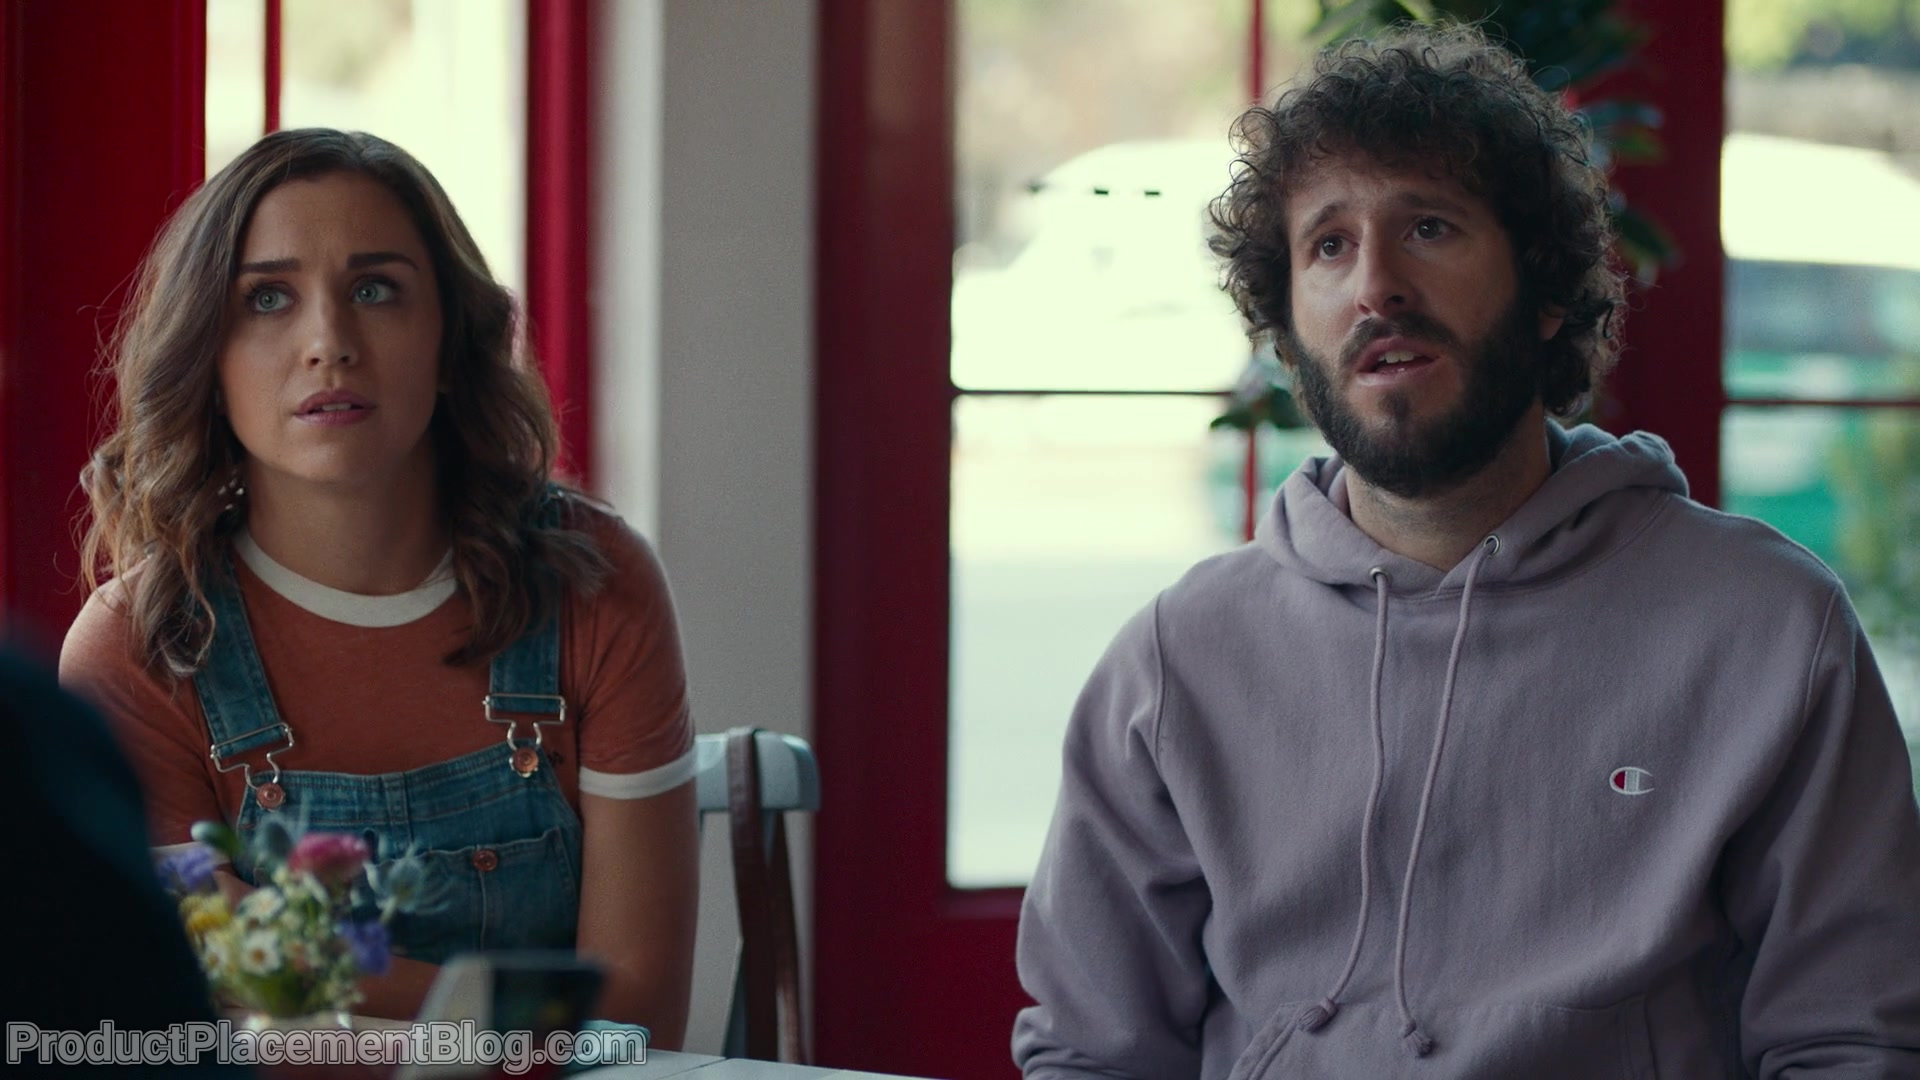 Champion Purple Hoodie Worn by Lil Dicky in Dave S01E01 "The Gander&qu...